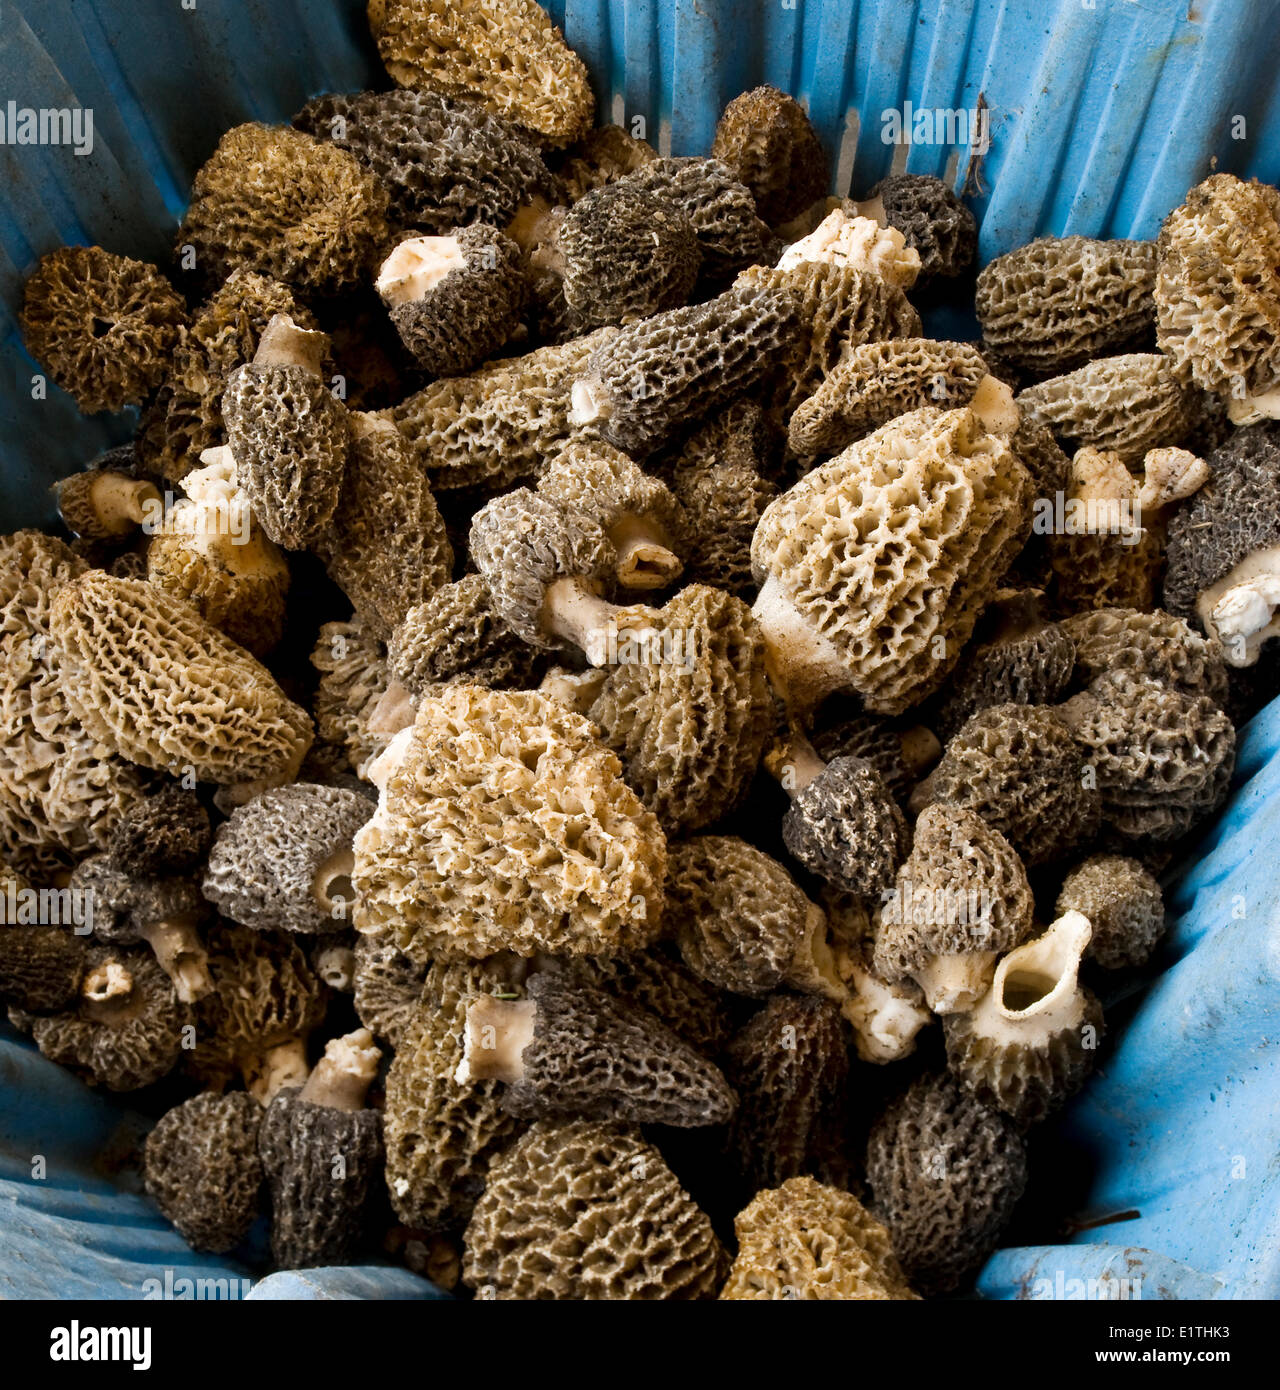 edible mushrooms morels Morchella sp. ready for sale, mushroom picking after fire in Chilcotin, British Columbia, Canada Stock Photo